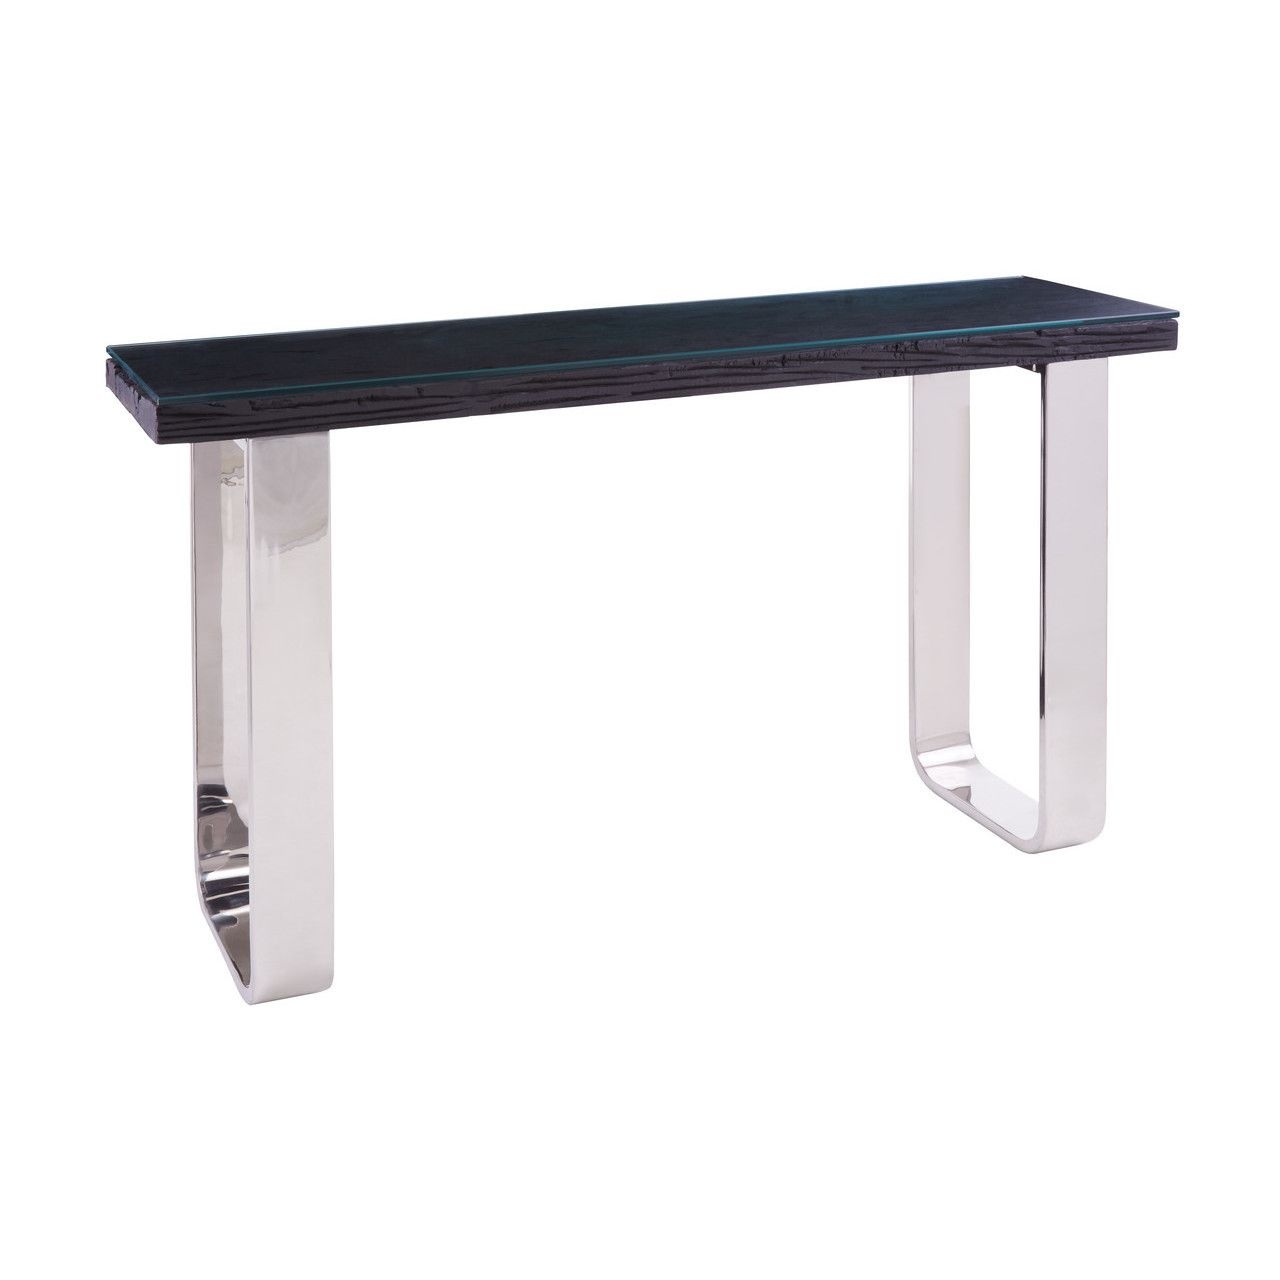 Kera Glass Console Table In Black With U Shaped Metal Base